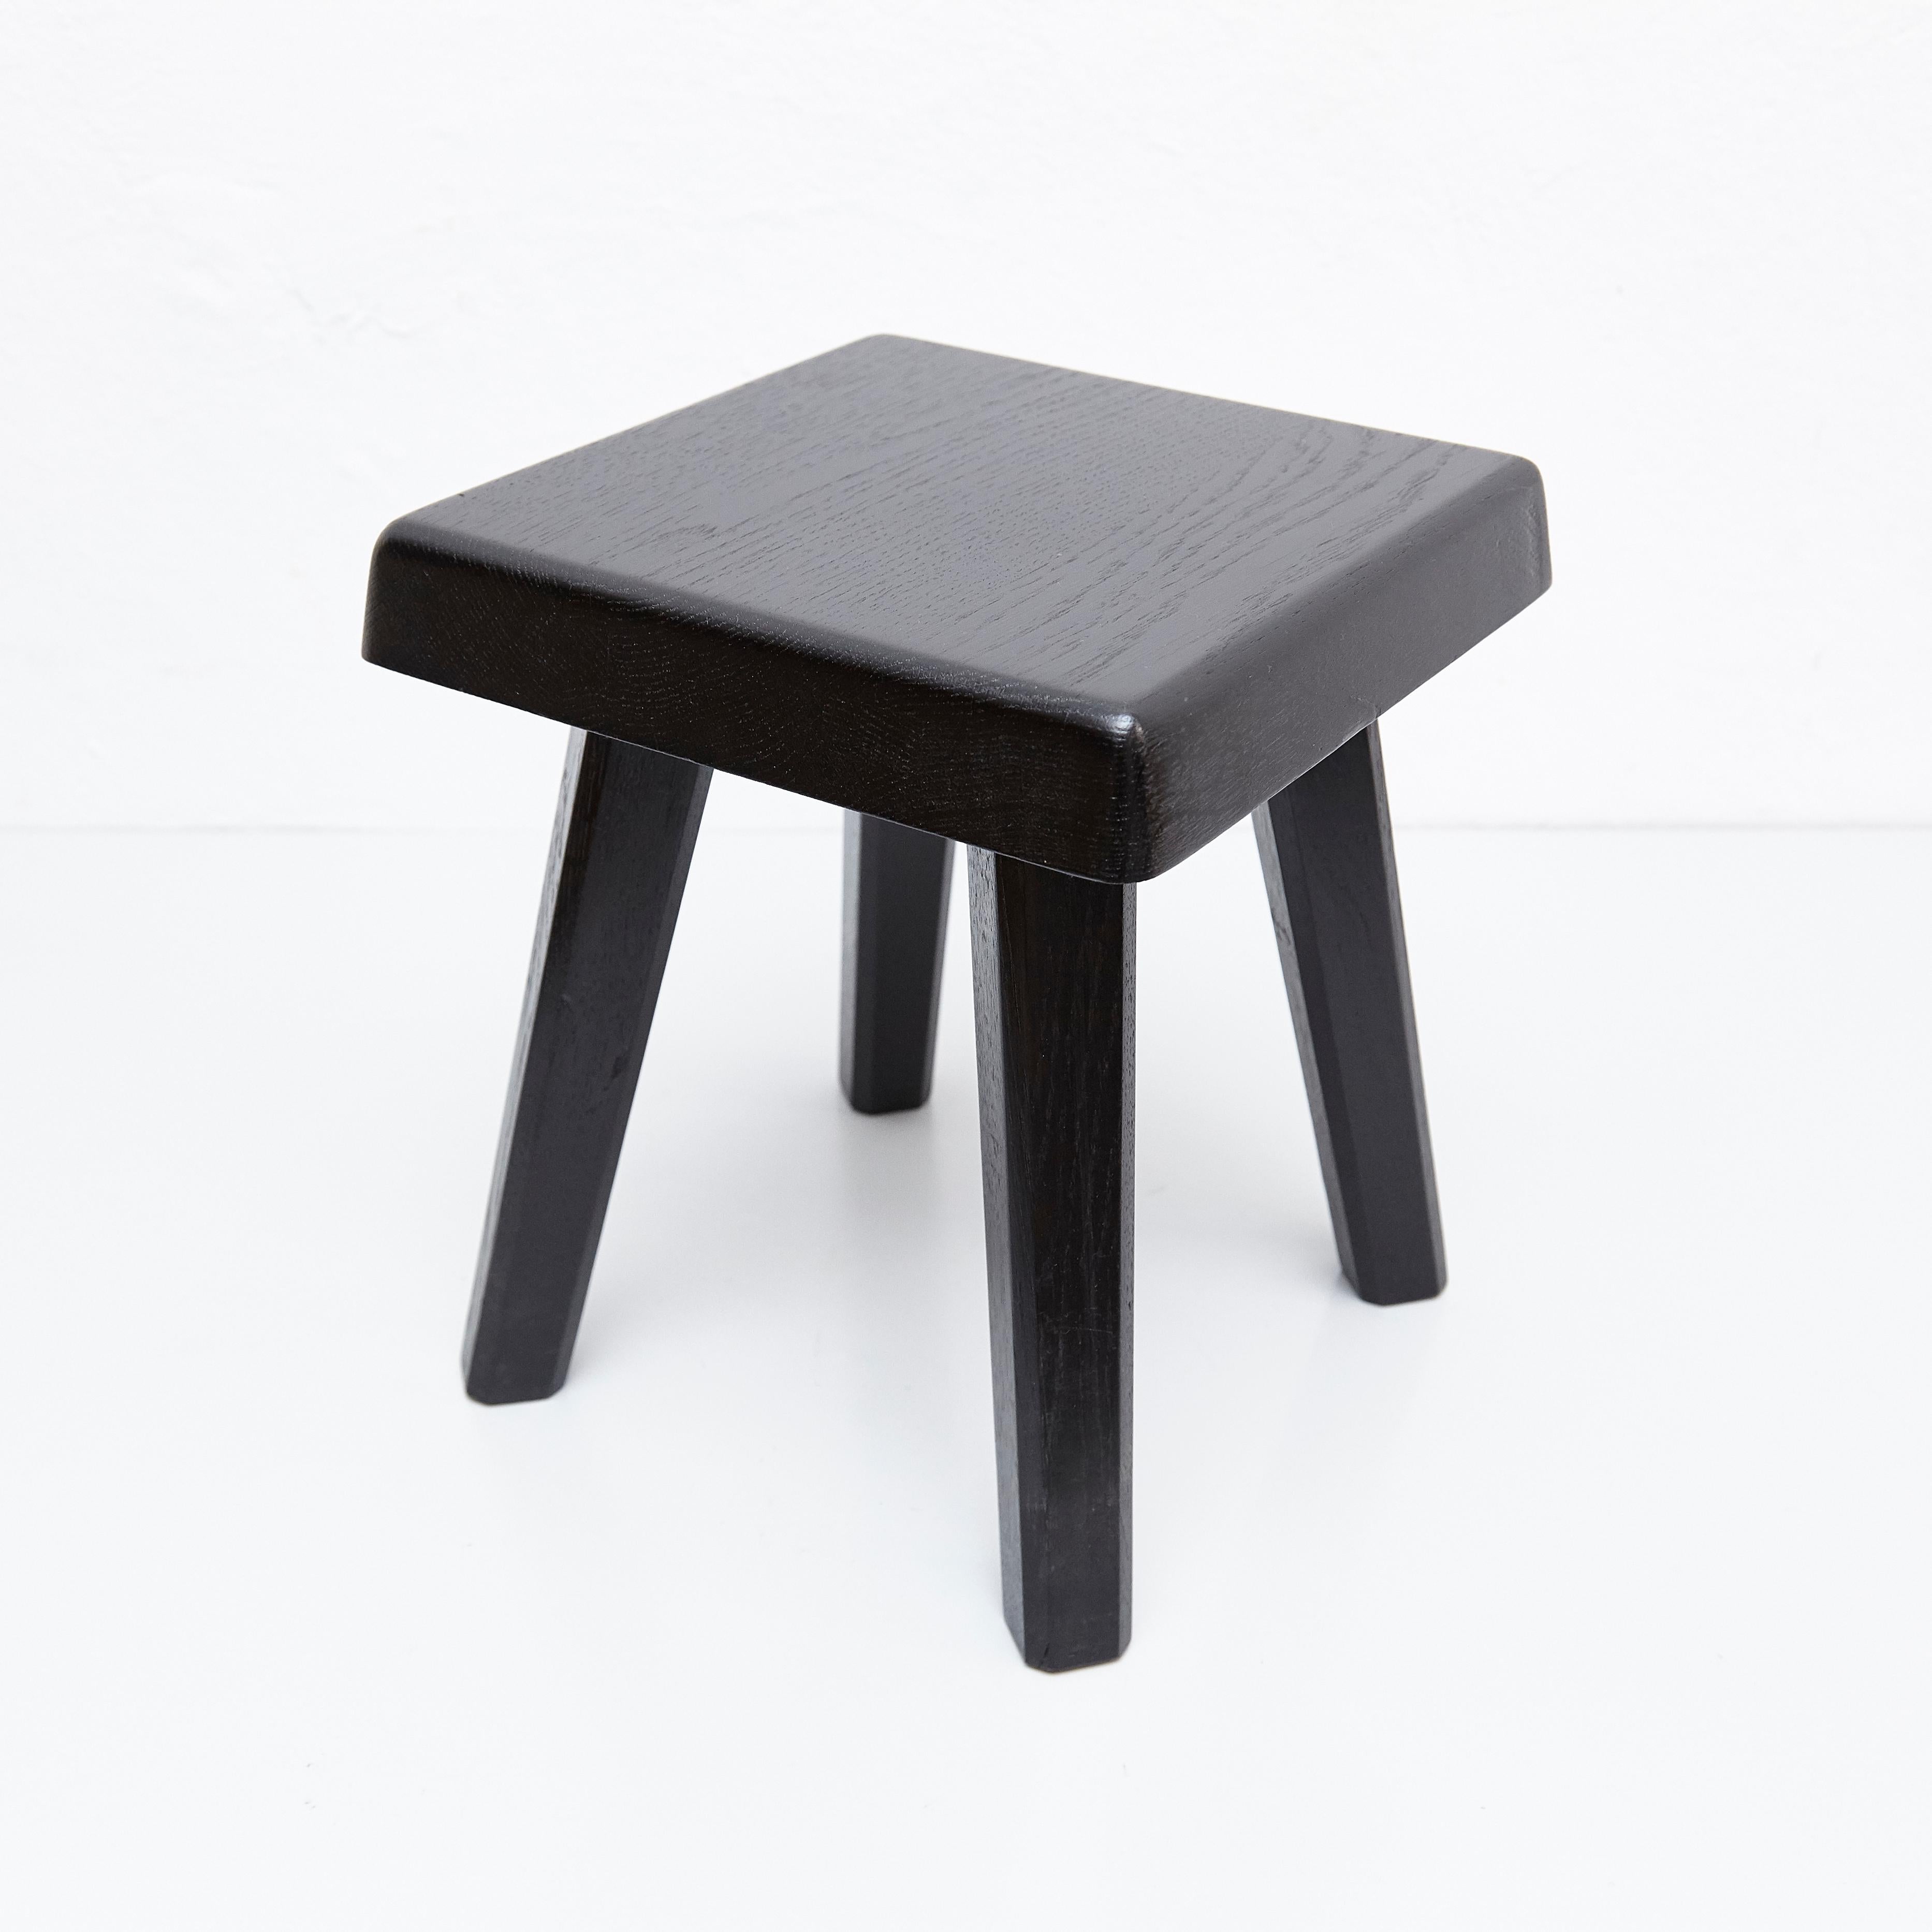 Special black edition stools designed by Pierre Chapo, manufactured in France, 1960s.
Manufactured by Chapo creations in 2019

Solid oakwood.

Stamped

Measures: Small 29 x 29 x 33 cm

In good original condition, with minor wear consistent